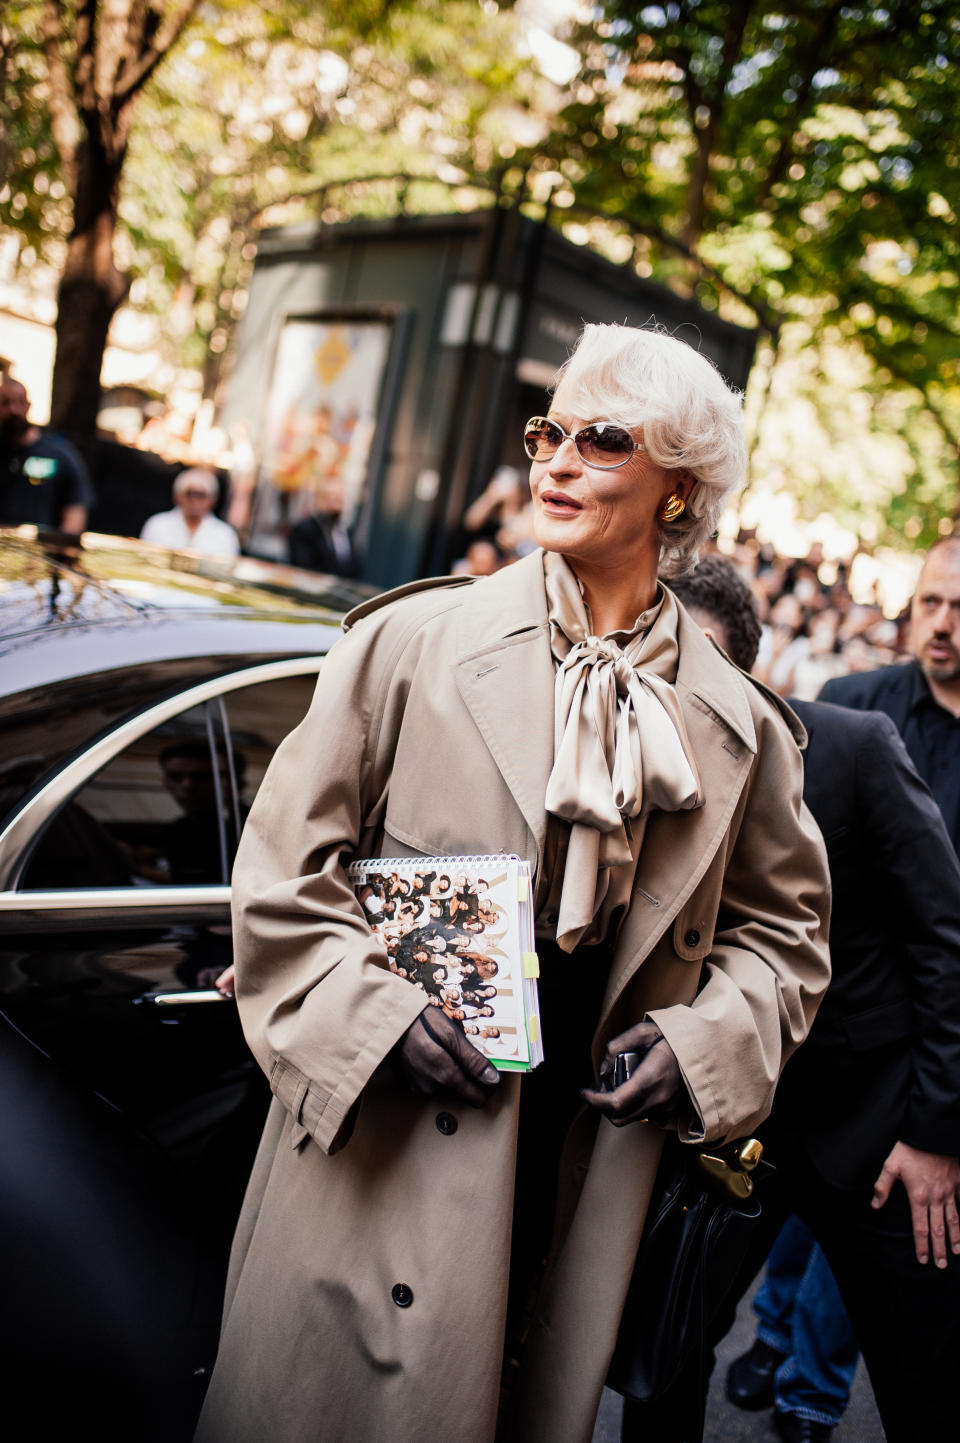 Alexis Stone with short hair and sunglasses, dressed stylishly in a beige trench coat and holding a magazine, stands next to a car in a busy street